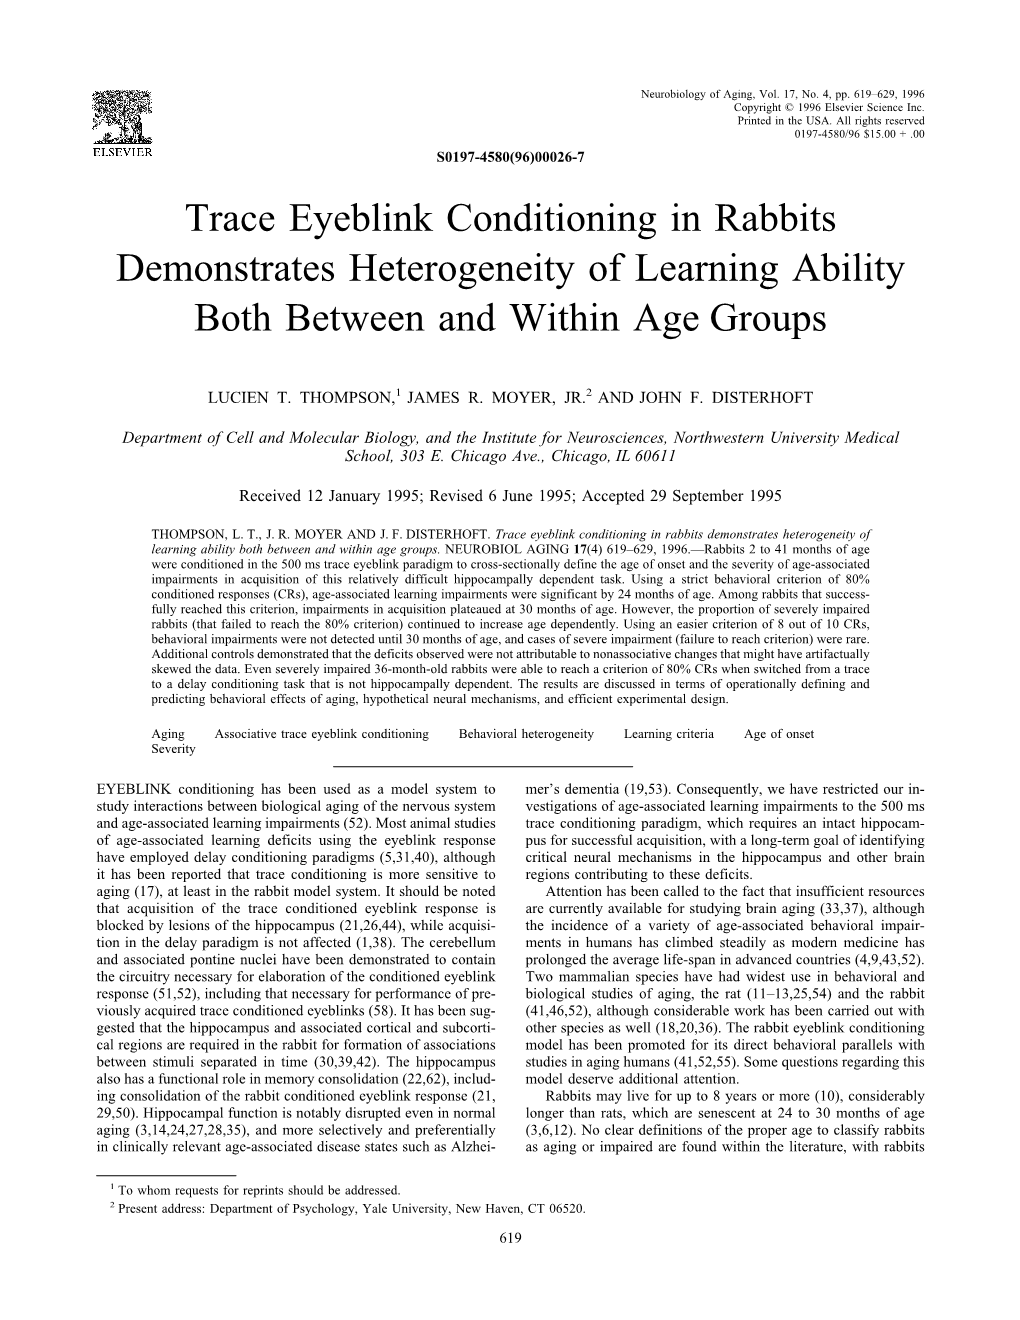 Trace Eyeblink Conditioning in Rabbits Demonstrates Heterogeneity of Learning Ability Both Between and Within Age Groups